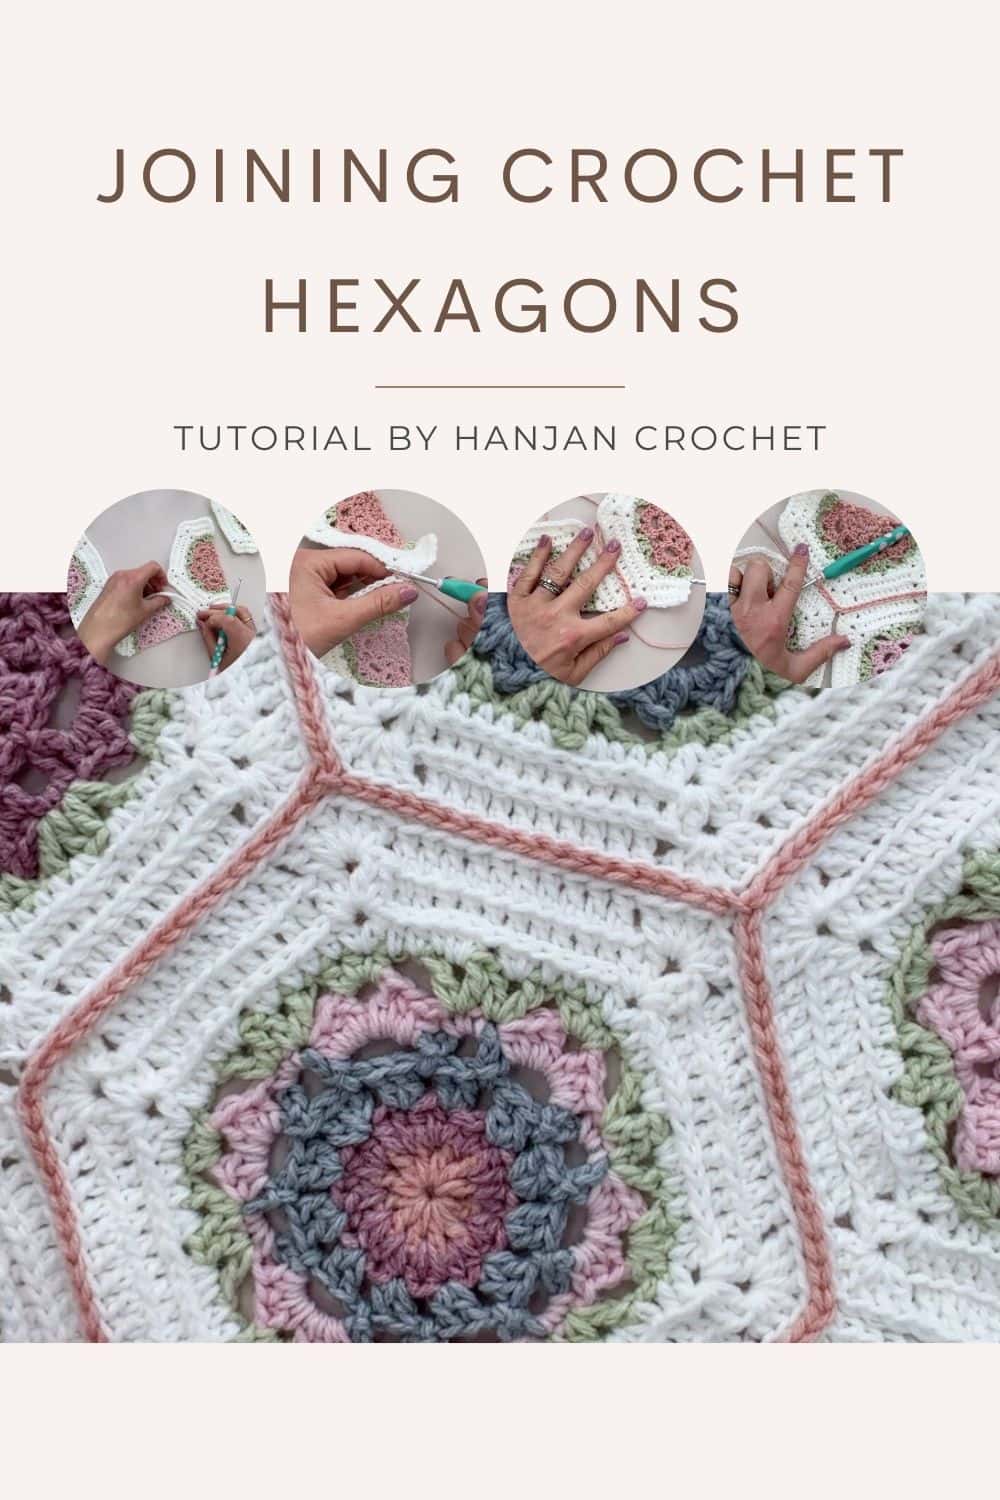 Images showing how to join crochet hexagons together.